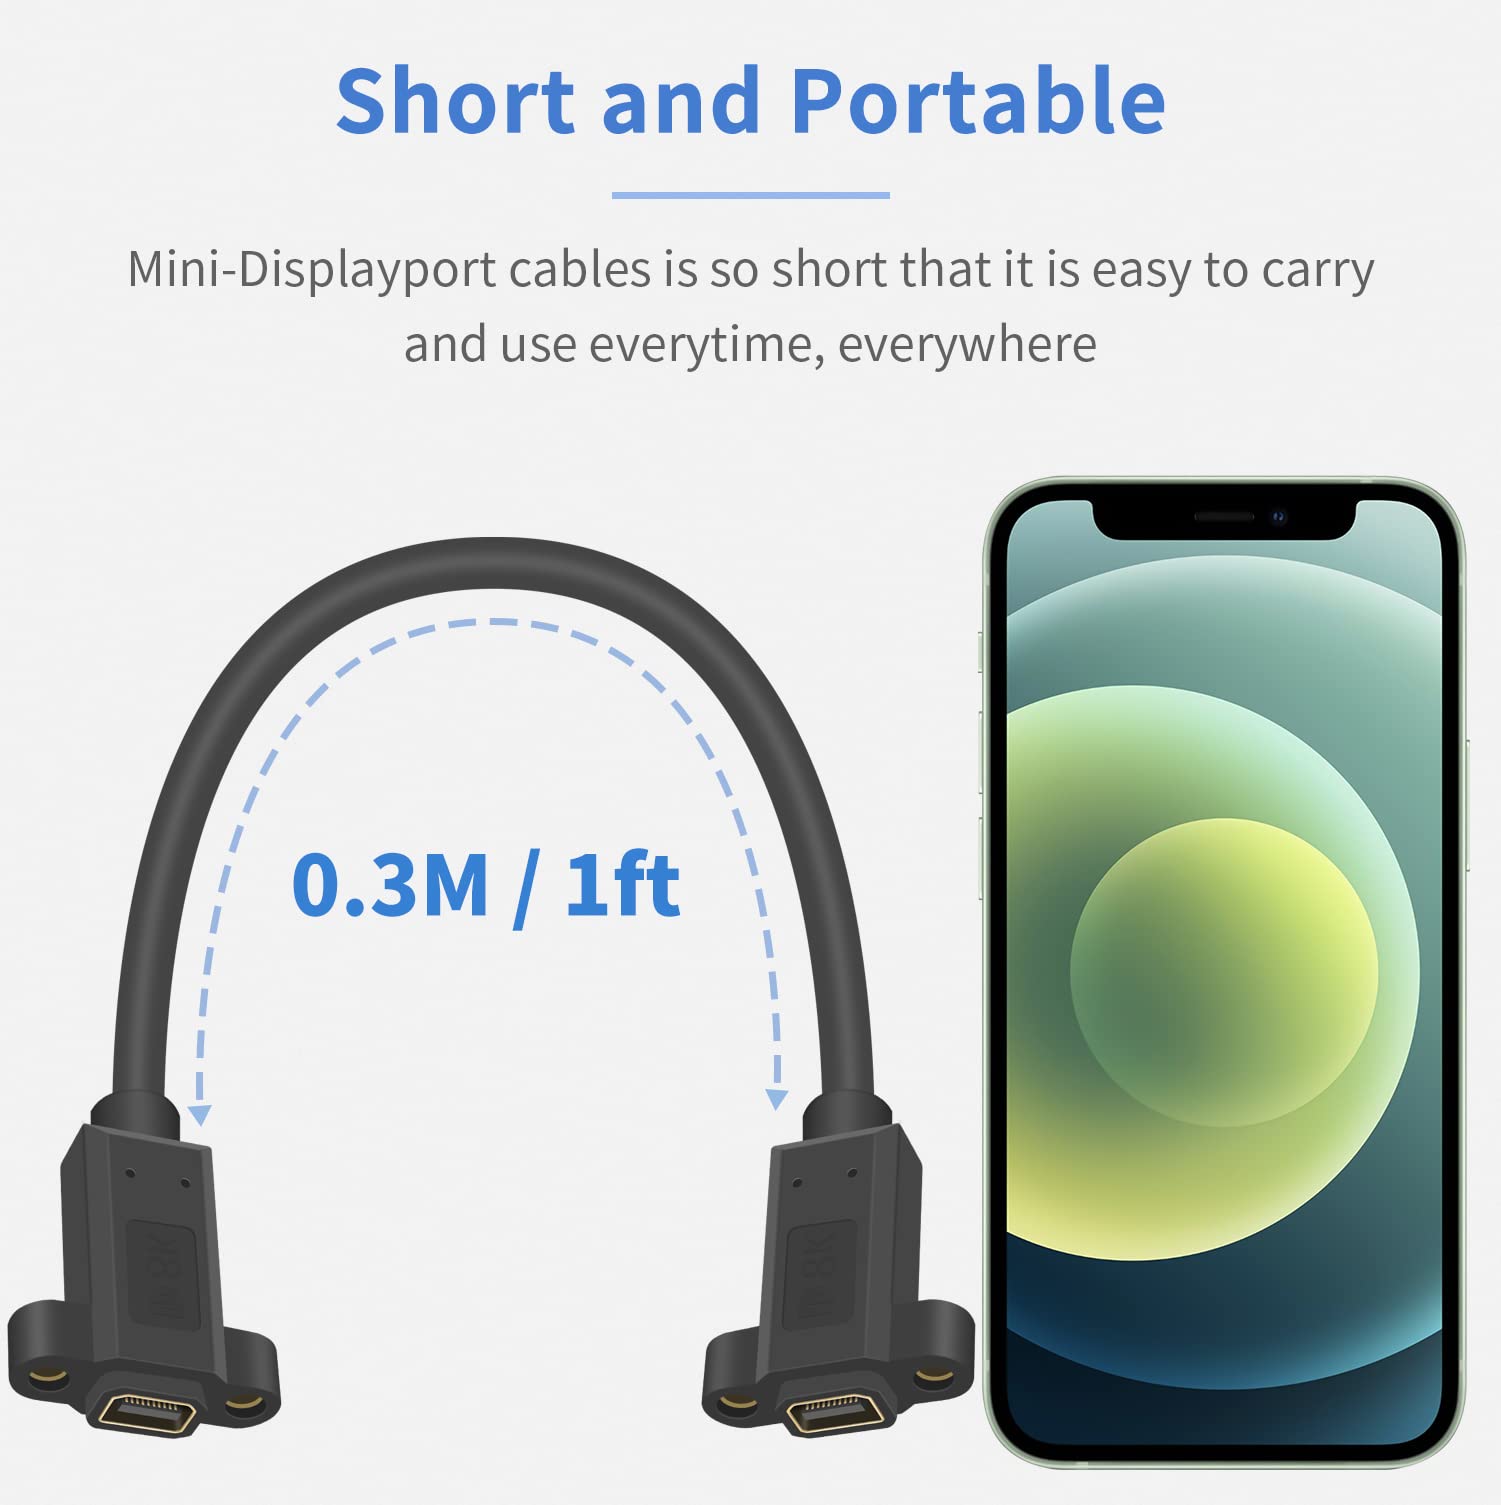 Poyiccot Mini DisplayPort Female to Female Cable 1ft, 8K@60hz Mini DP Extension Cable with Panel Mount, Mini DP Extender Cord Compatible with Computer Laptop, Not for Thunderbolt, 30cm